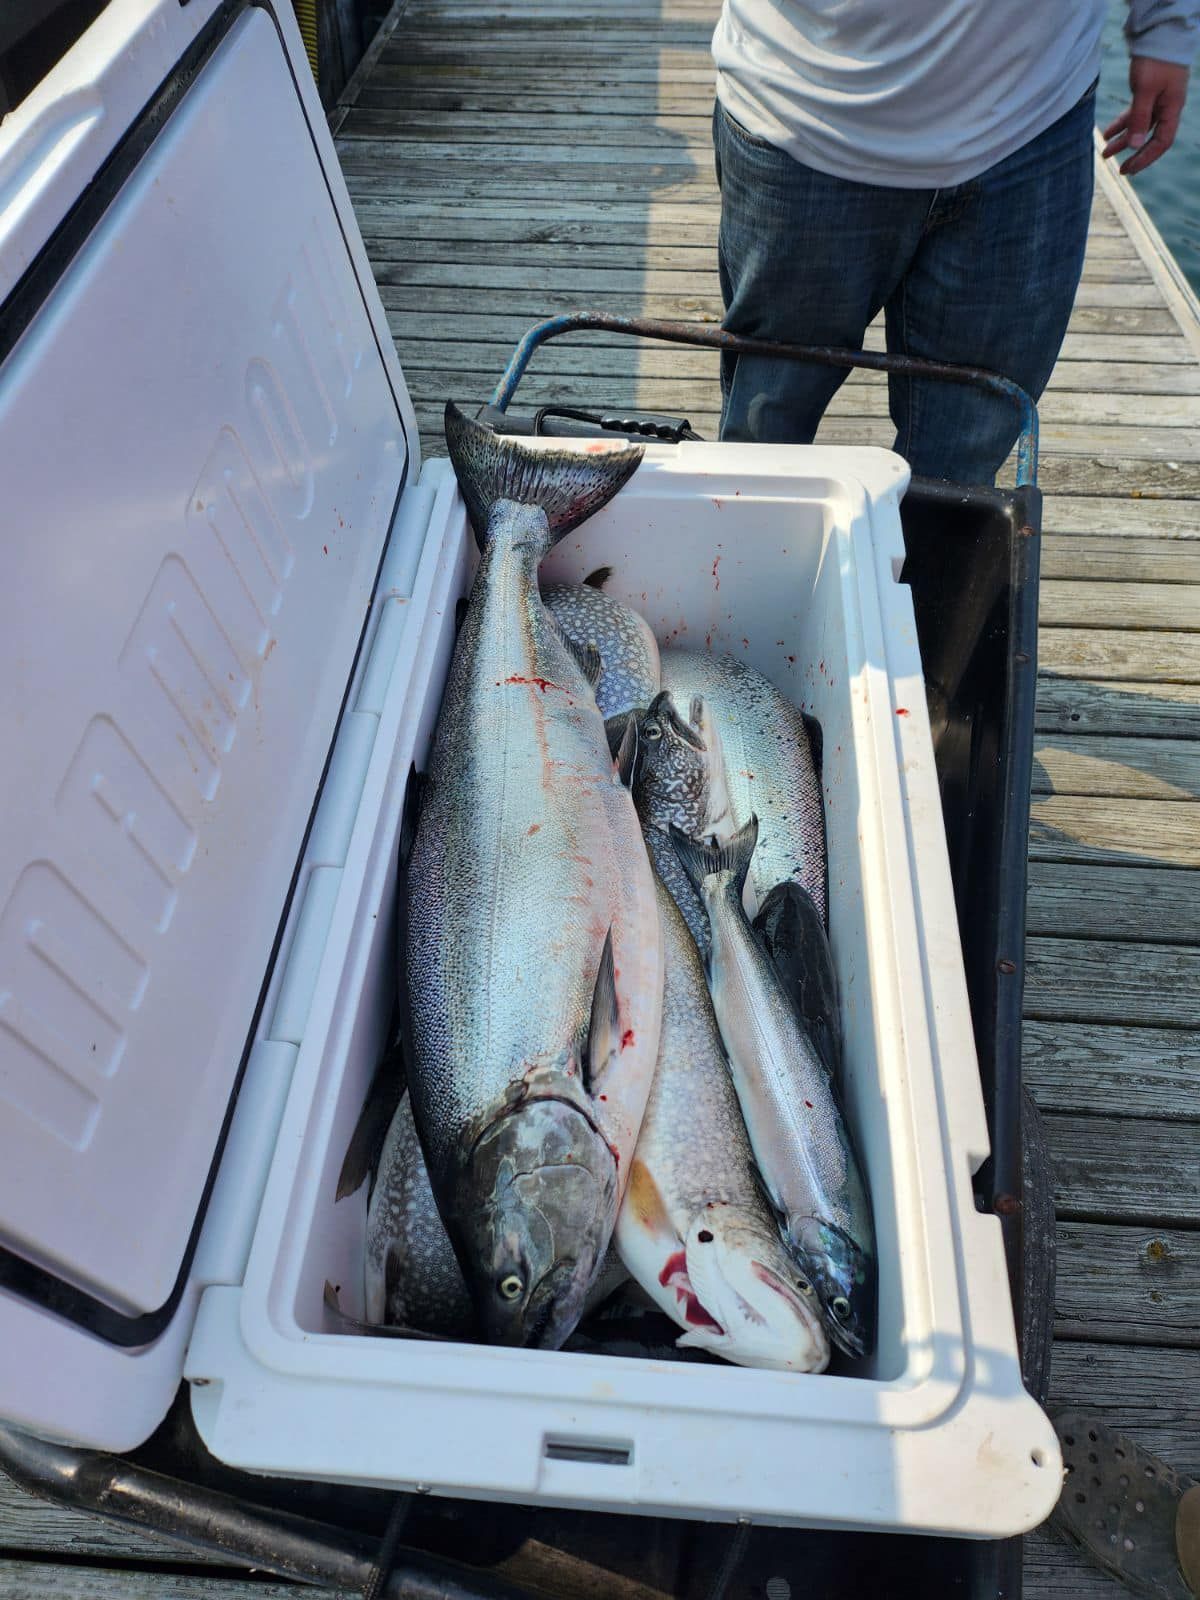 We provide a fishing experience that will fill coolers with trout and salmon. 